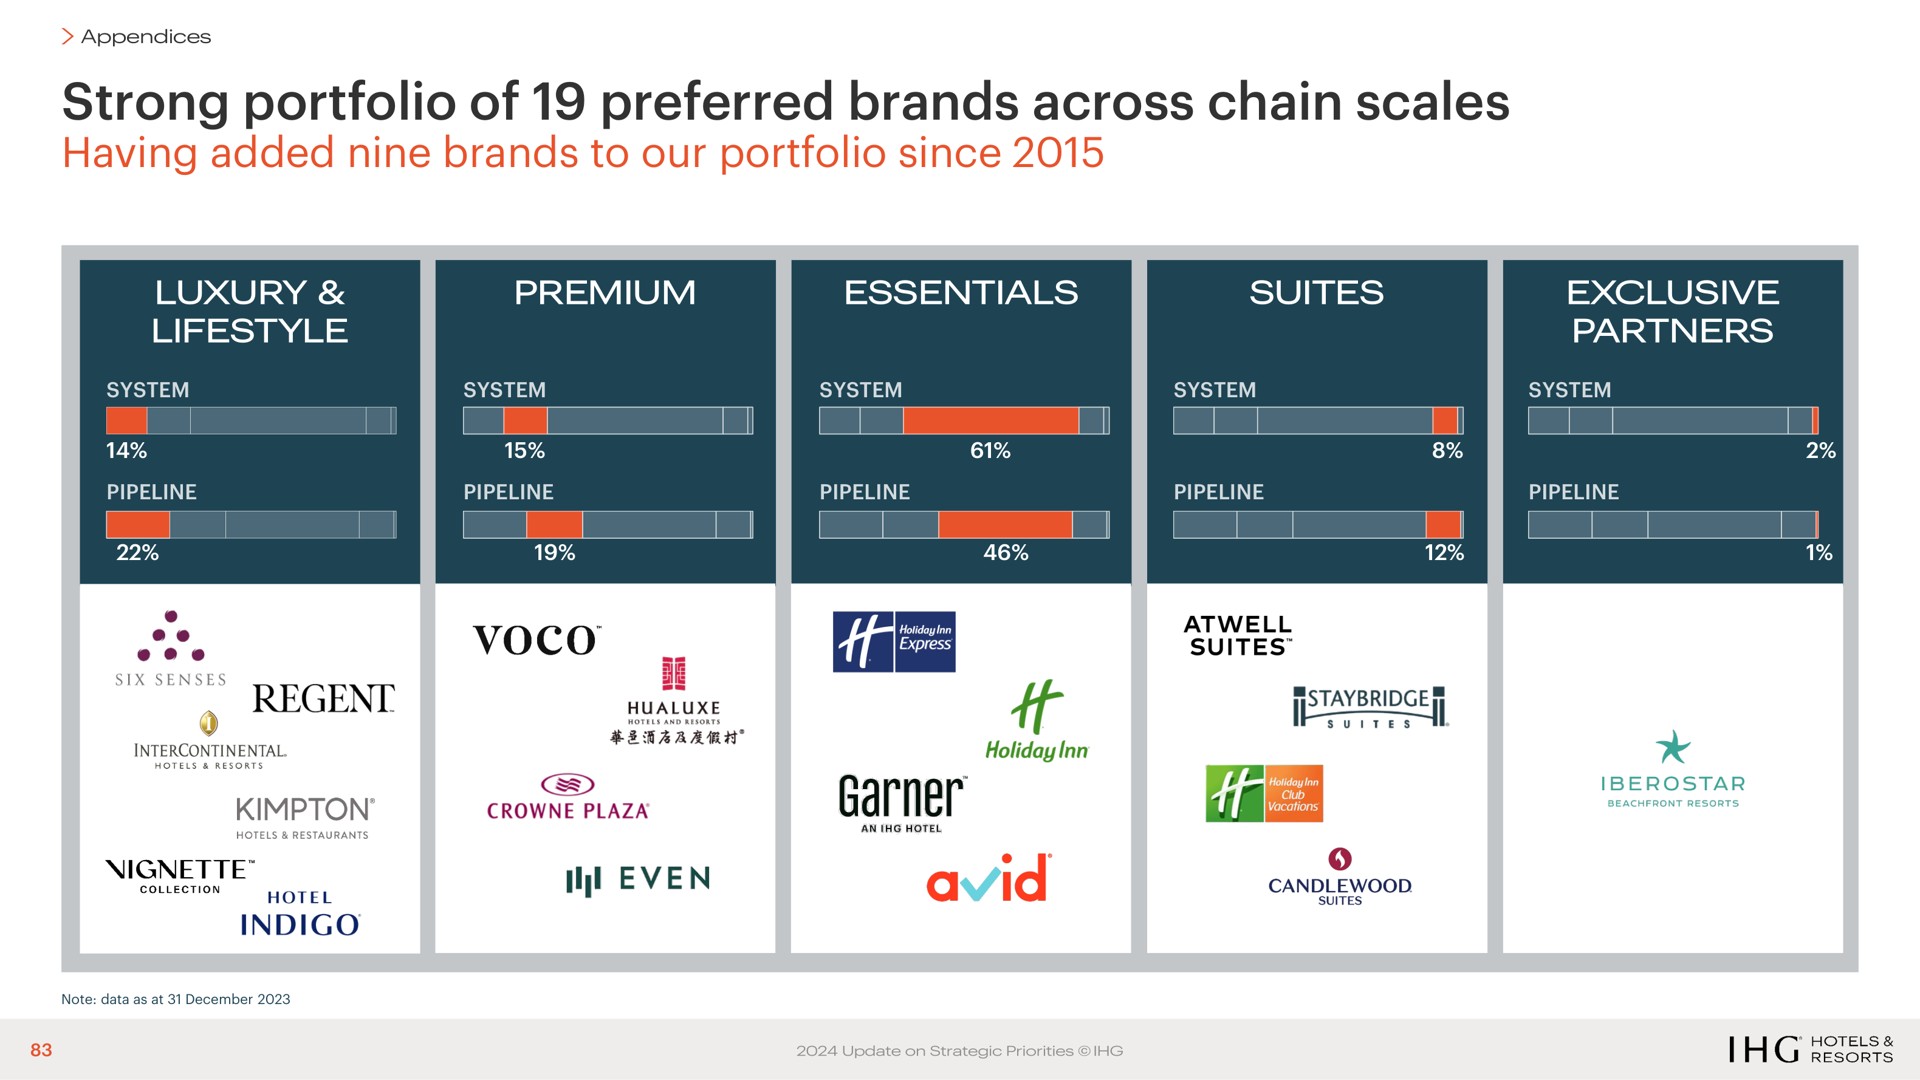 strong portfolio of preferred brands across chain scales having added nine brands to our portfolio since outs a ace even avid | IHG Hotels